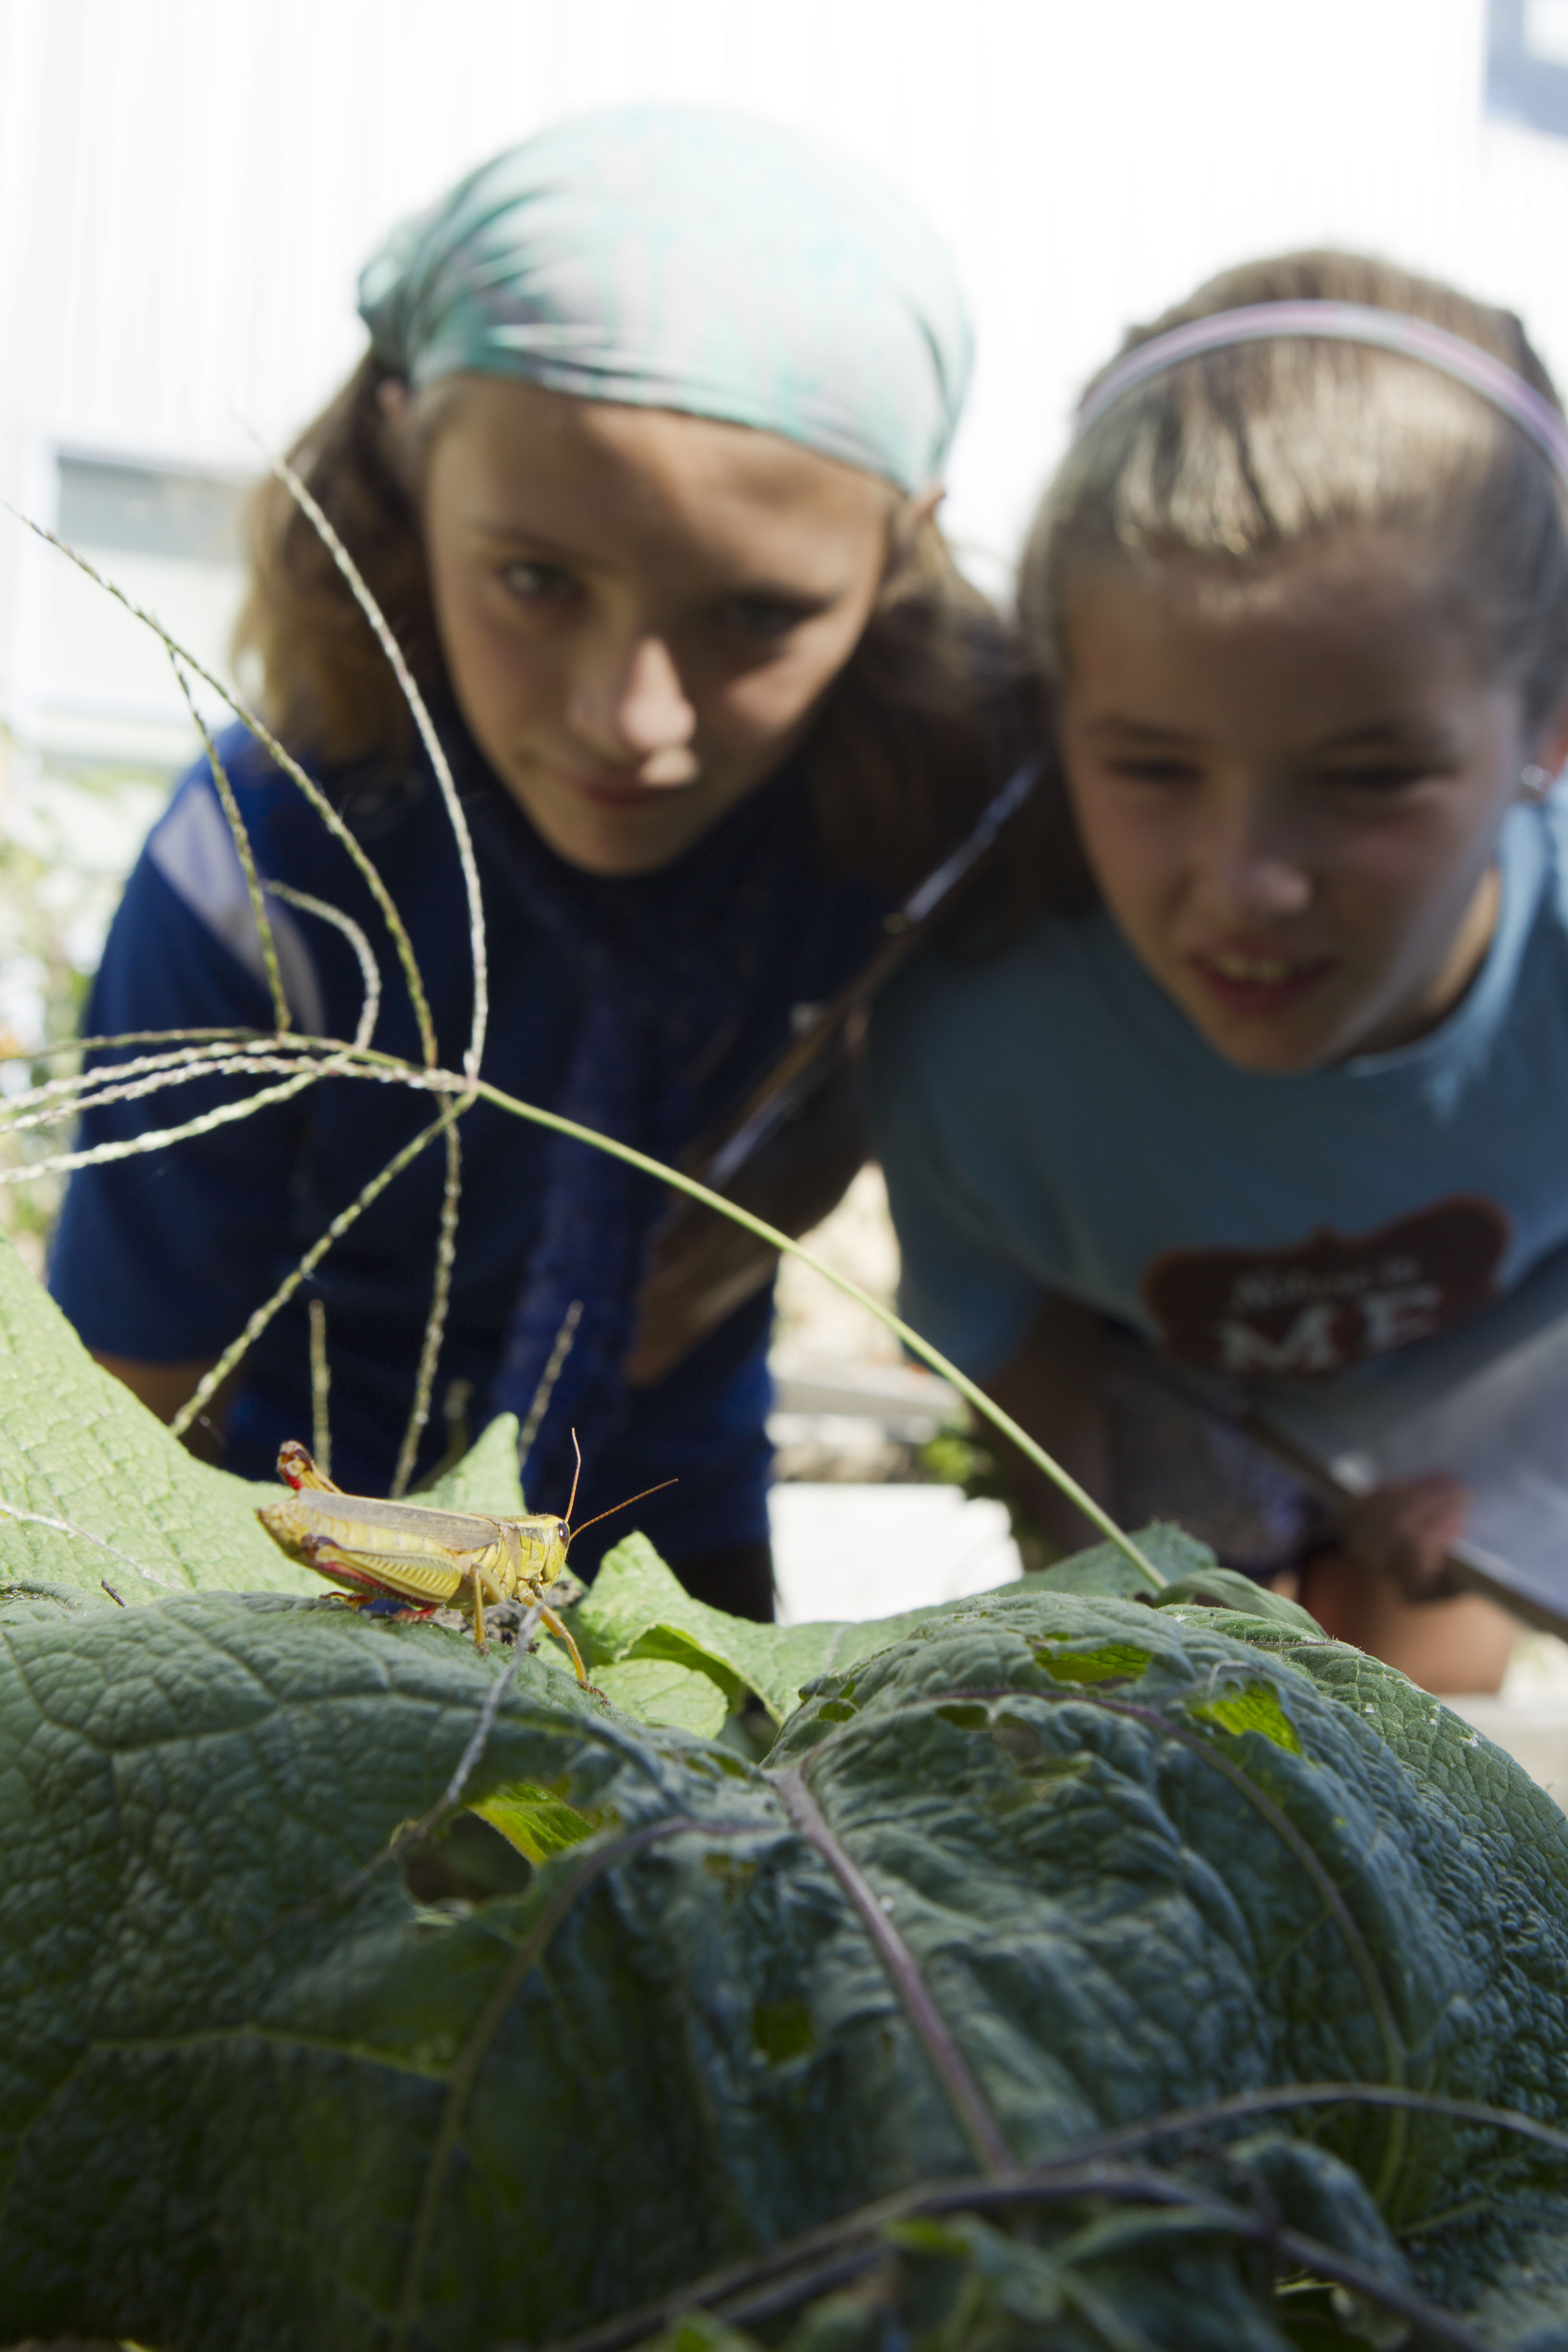 Two young people look at a grasshopper on a leaf.